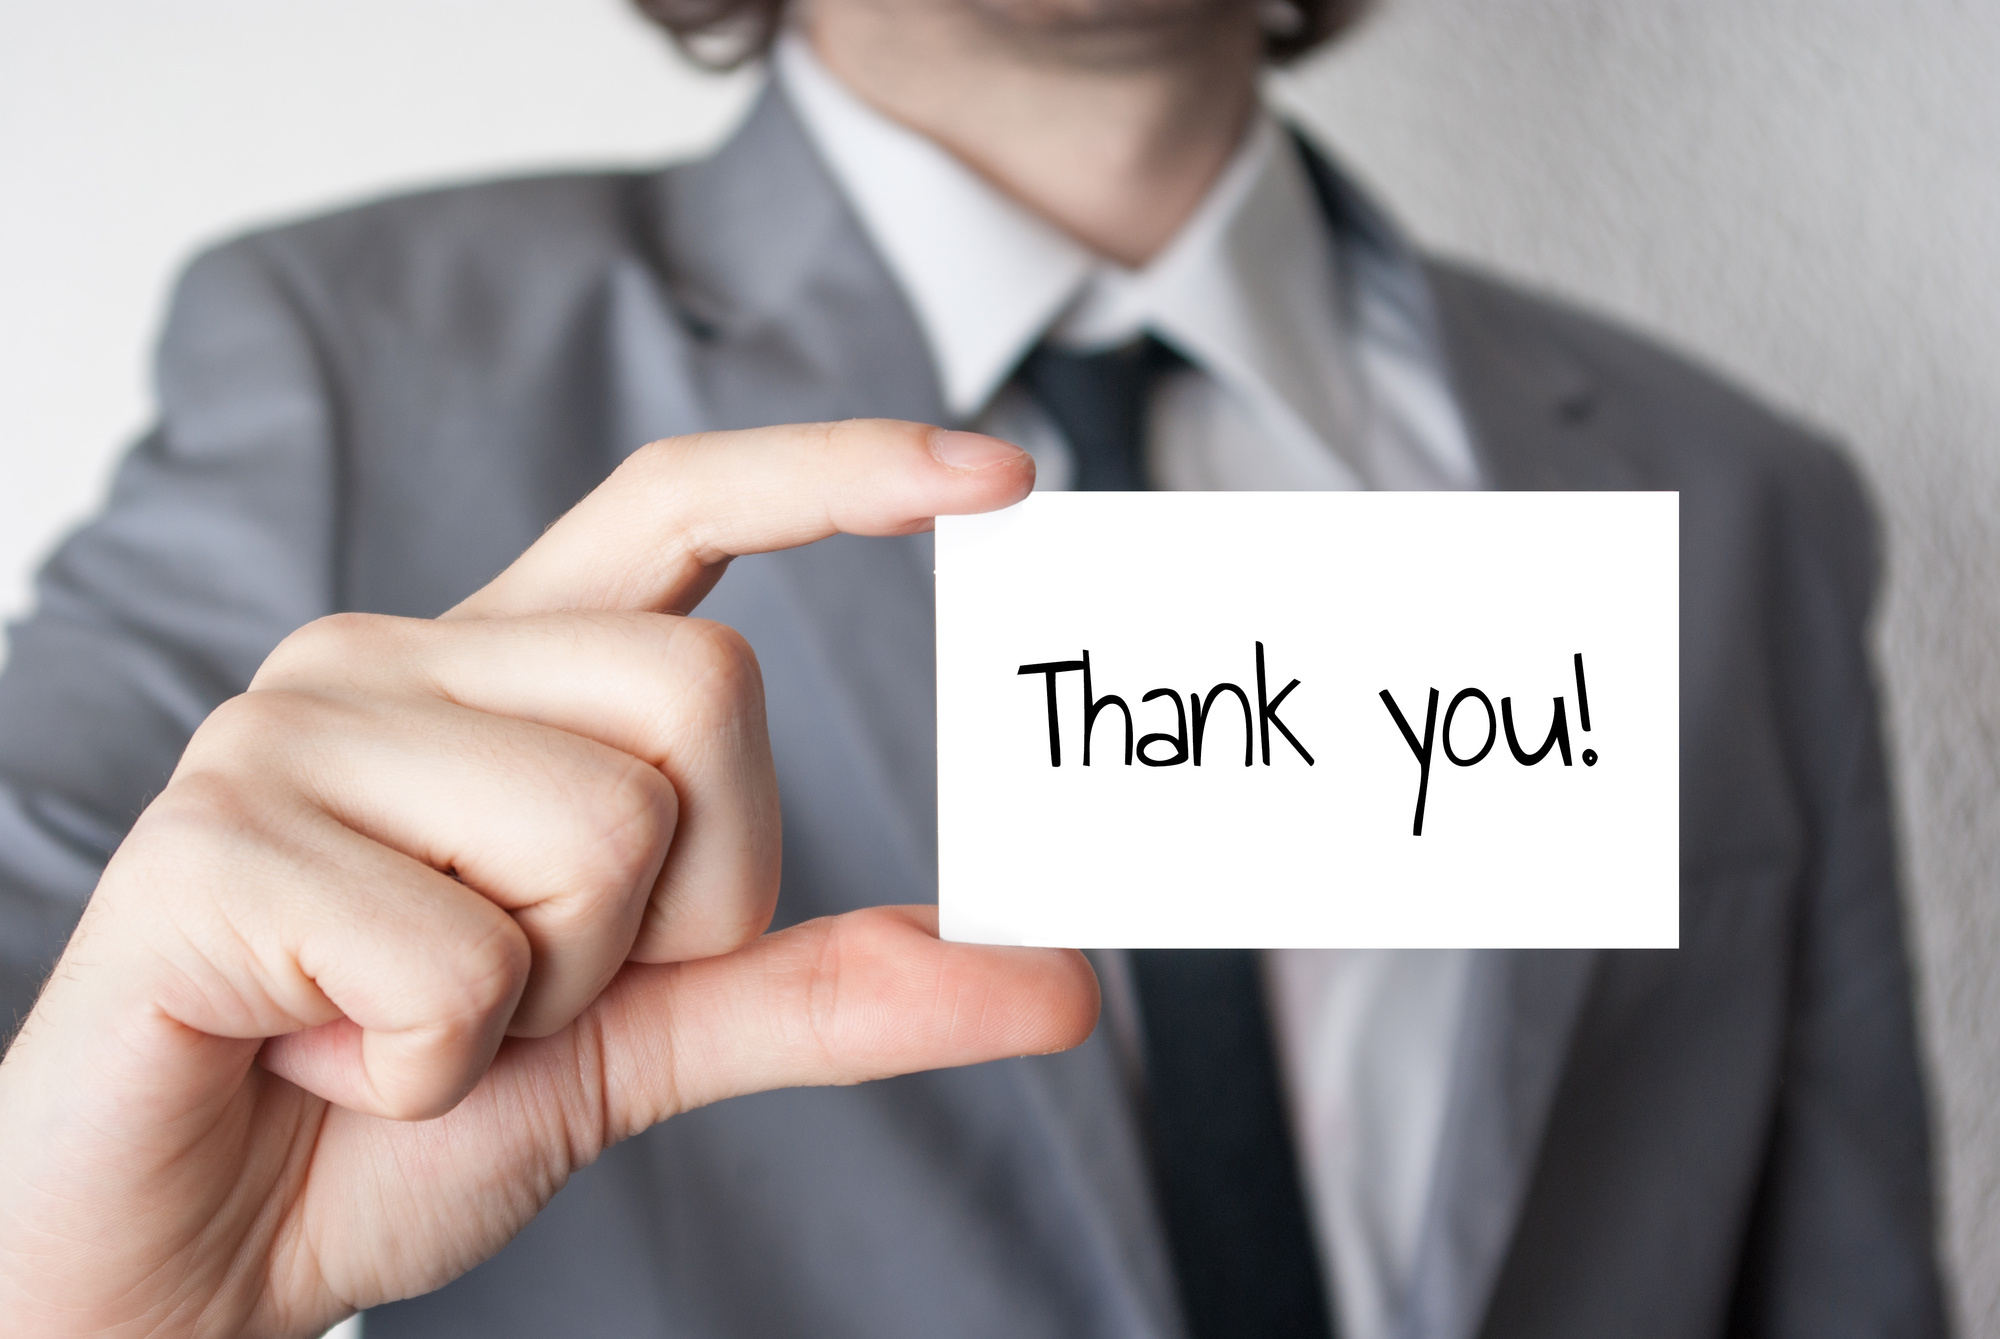 7 Client Thank You Gifts to Show Your Appreciation